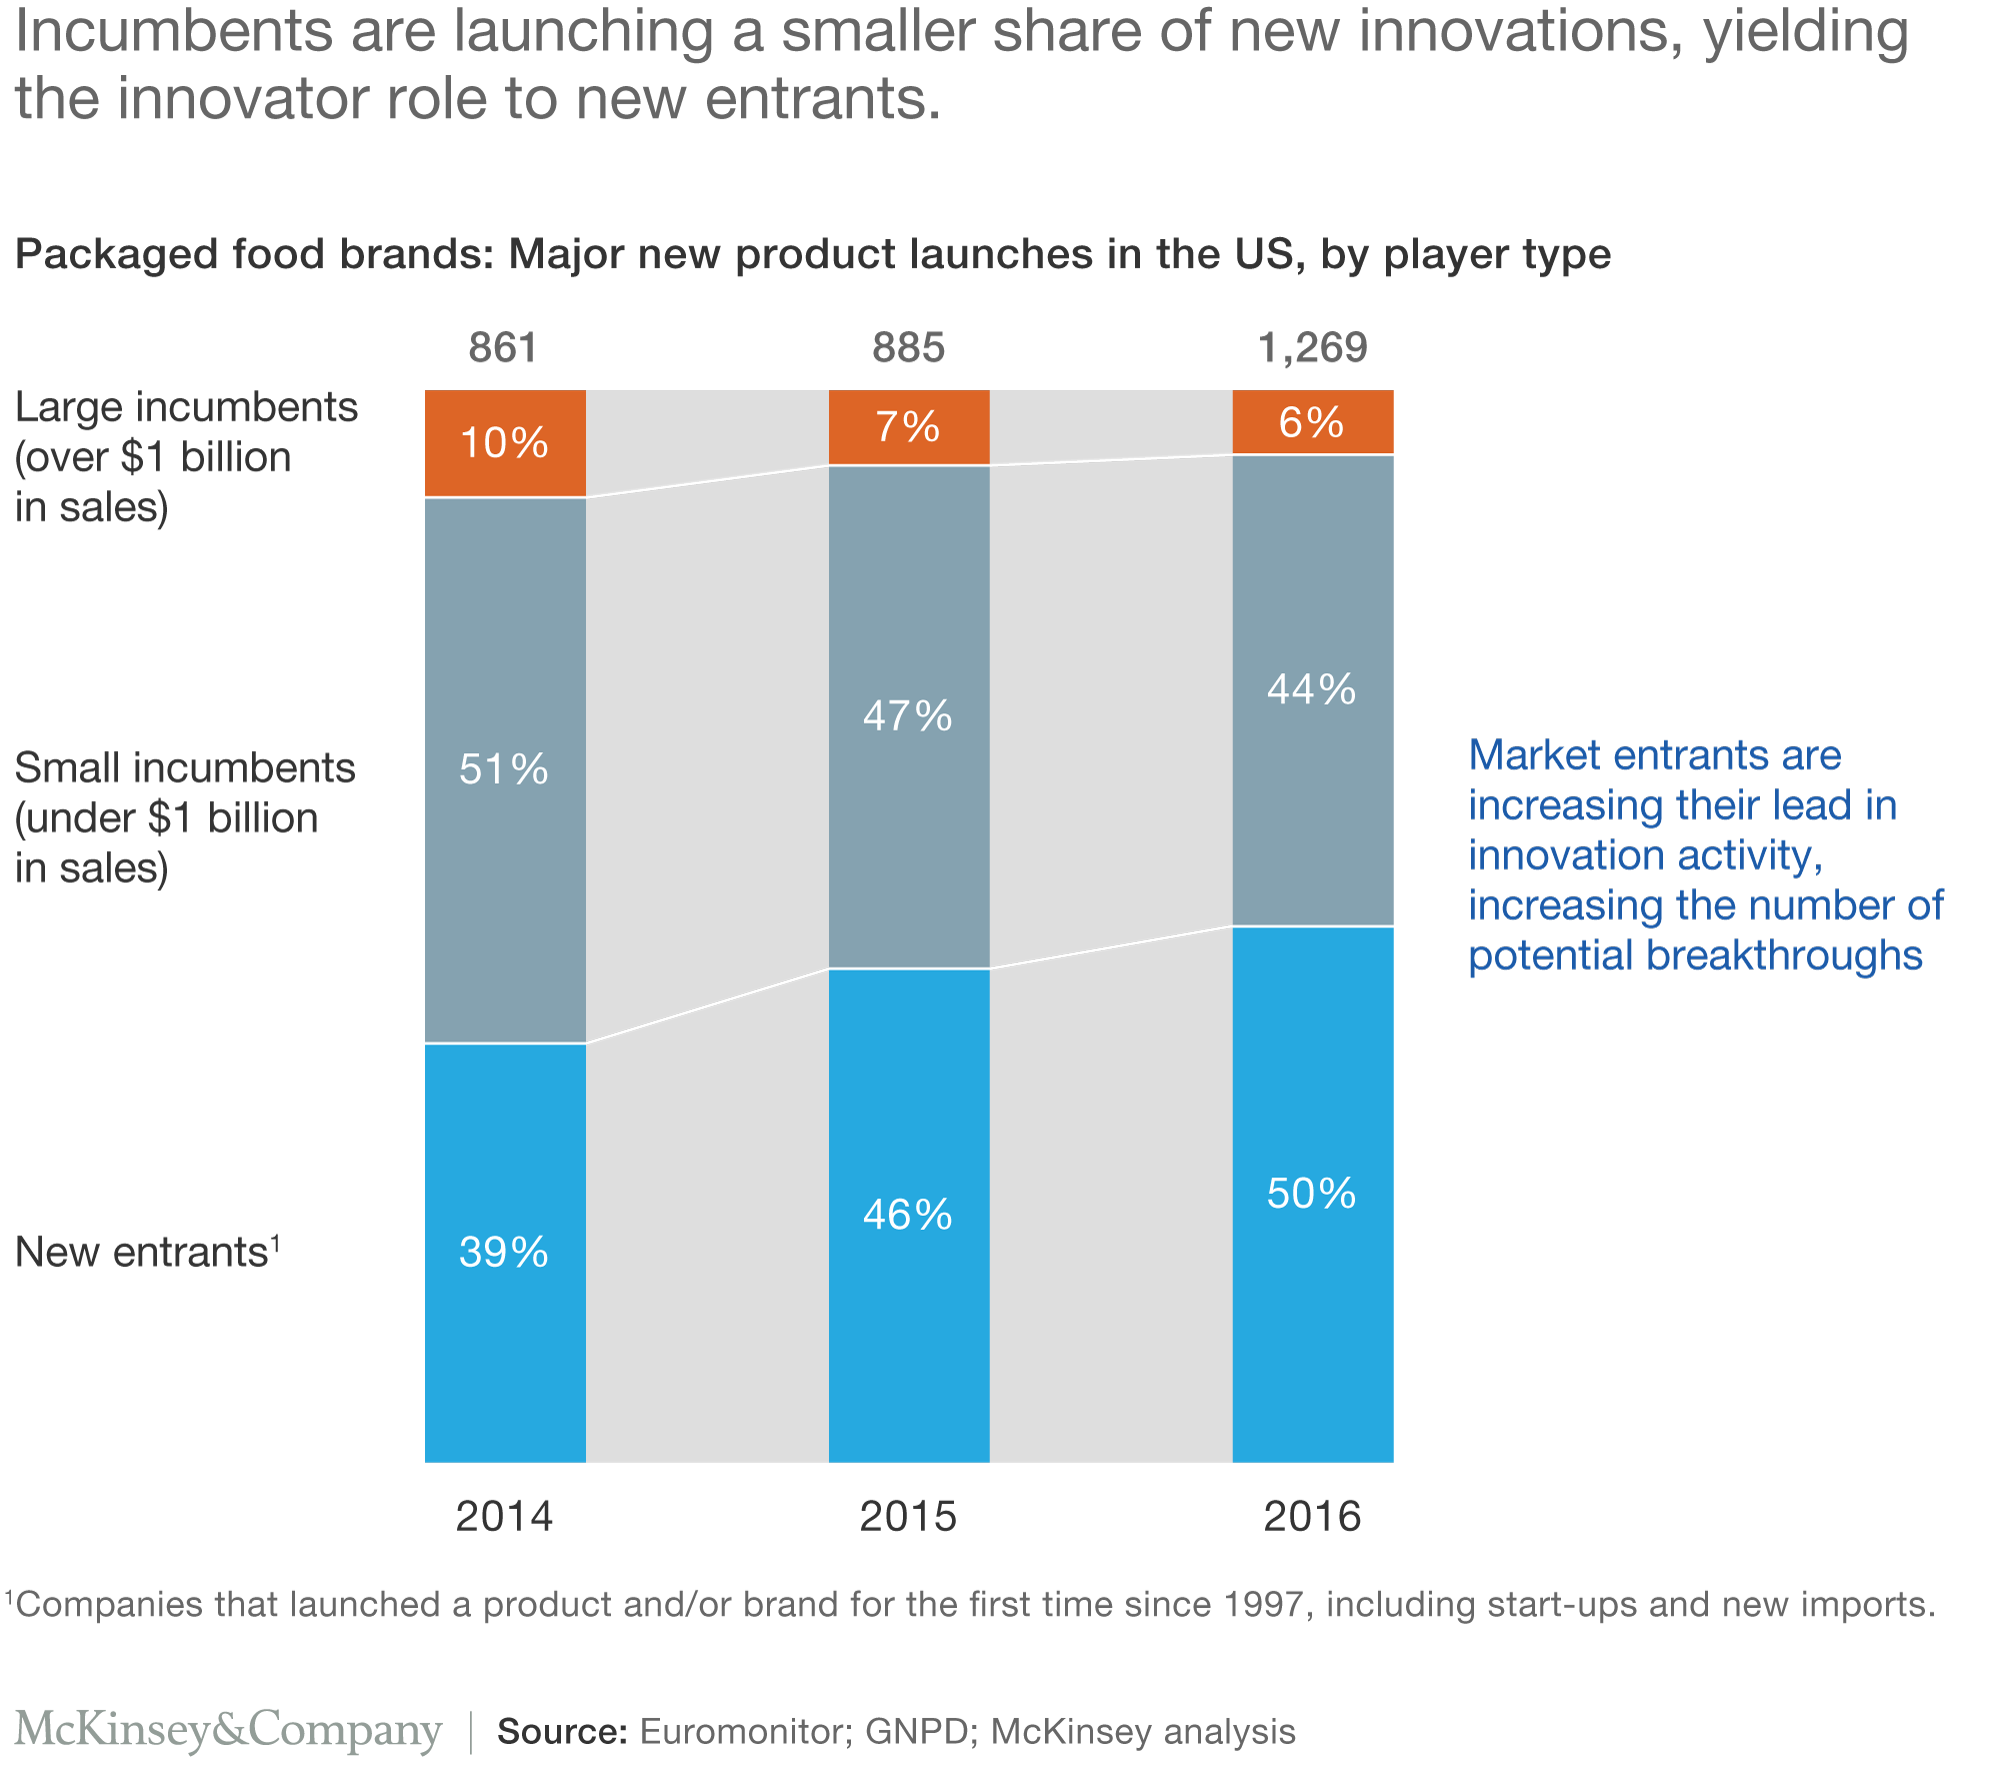 Get products faster with a new and improved R&D formula | McKinsey